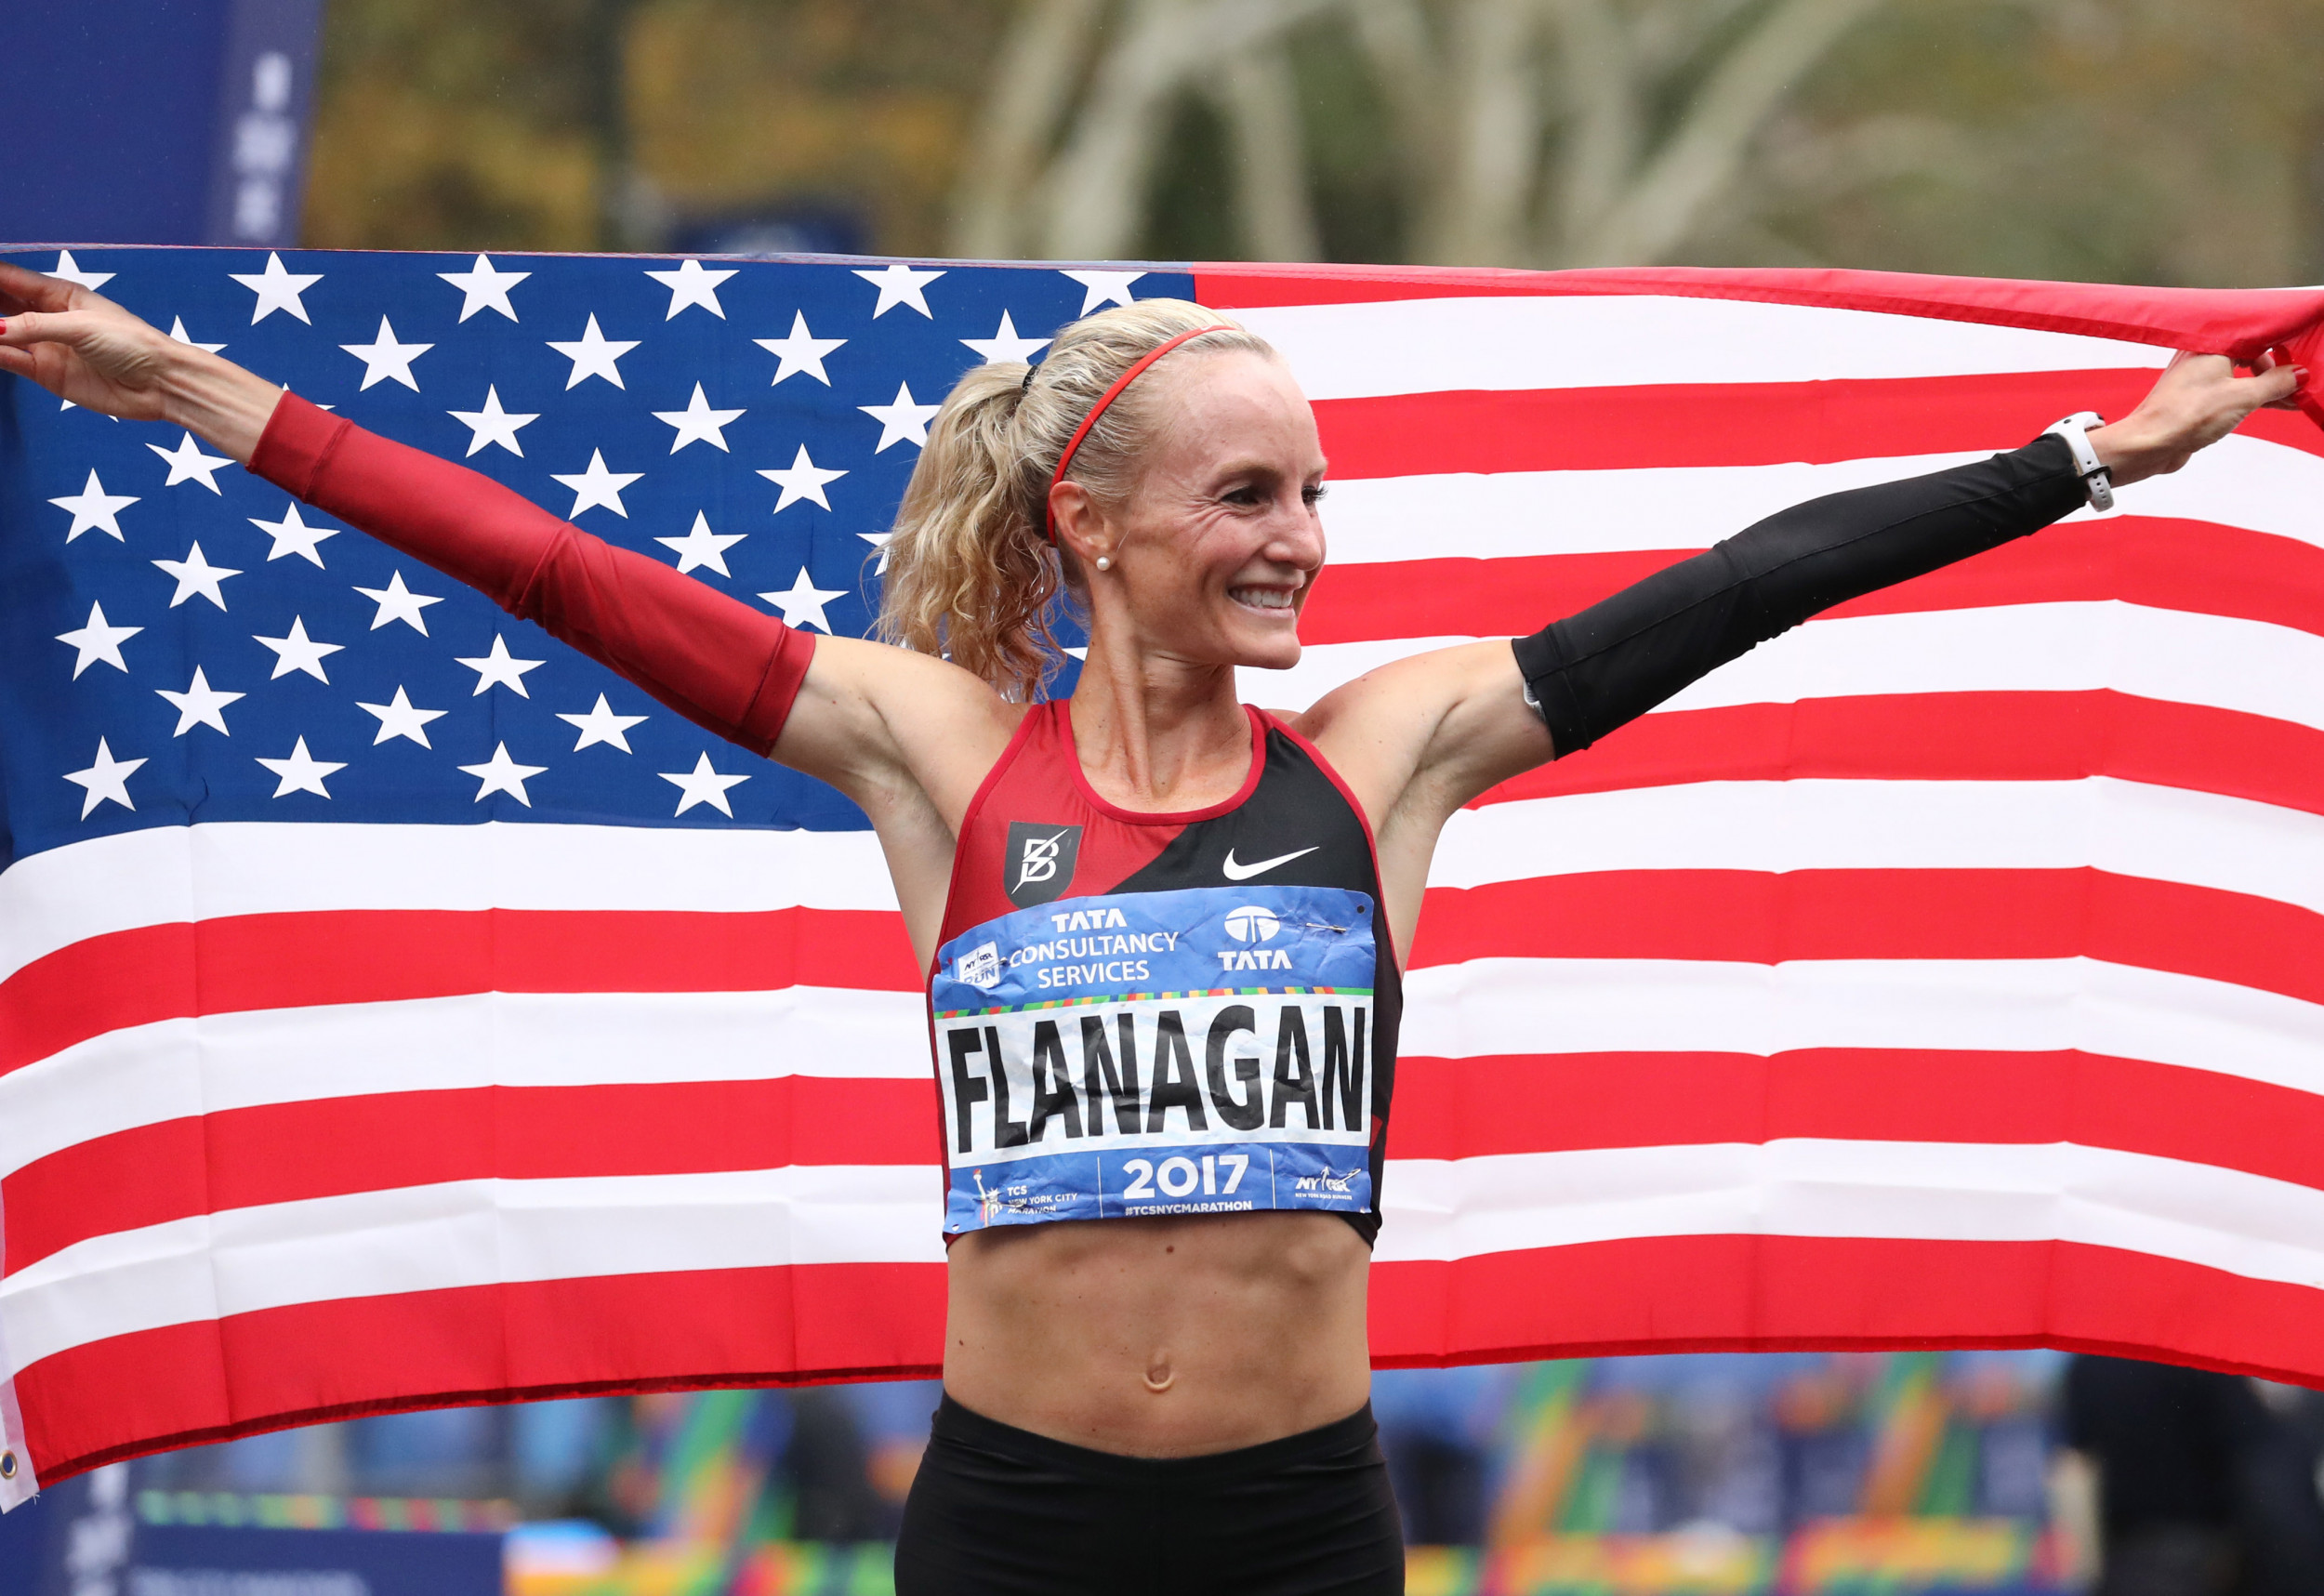 Shalane Flanagan Returns to NYC Marathon 4 Years After Historic Win With New Goal in Sight